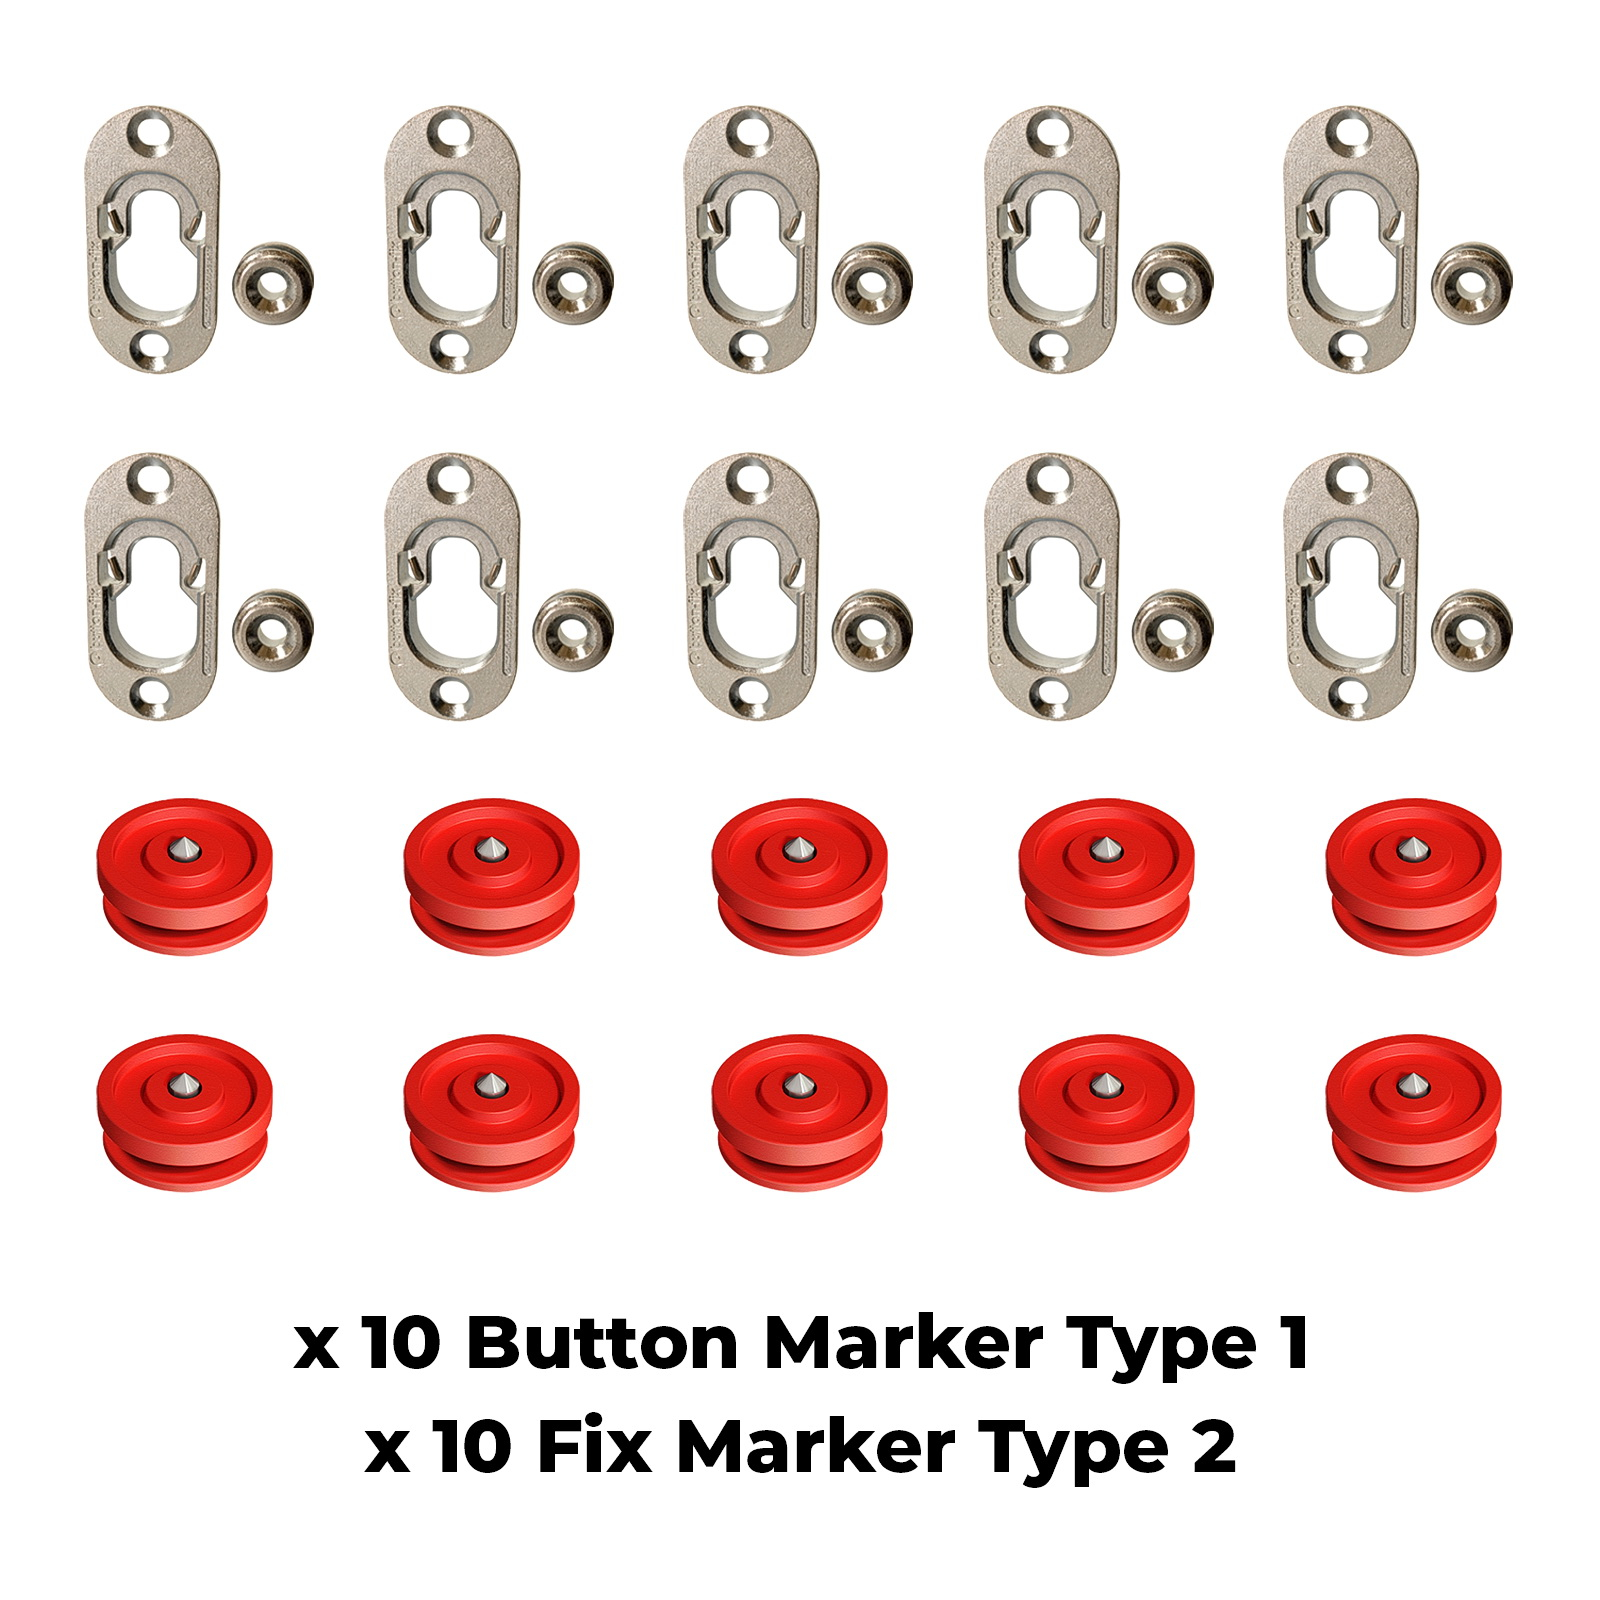 Button Fix Type 1 Metal Fix Bracket Fixing with Stainless Steel Retaining Spring for Fire Retardant Panels, Marine Interiors, Vibration & Shock Tested + Marker Tools x10 + 10 Marker Tool's